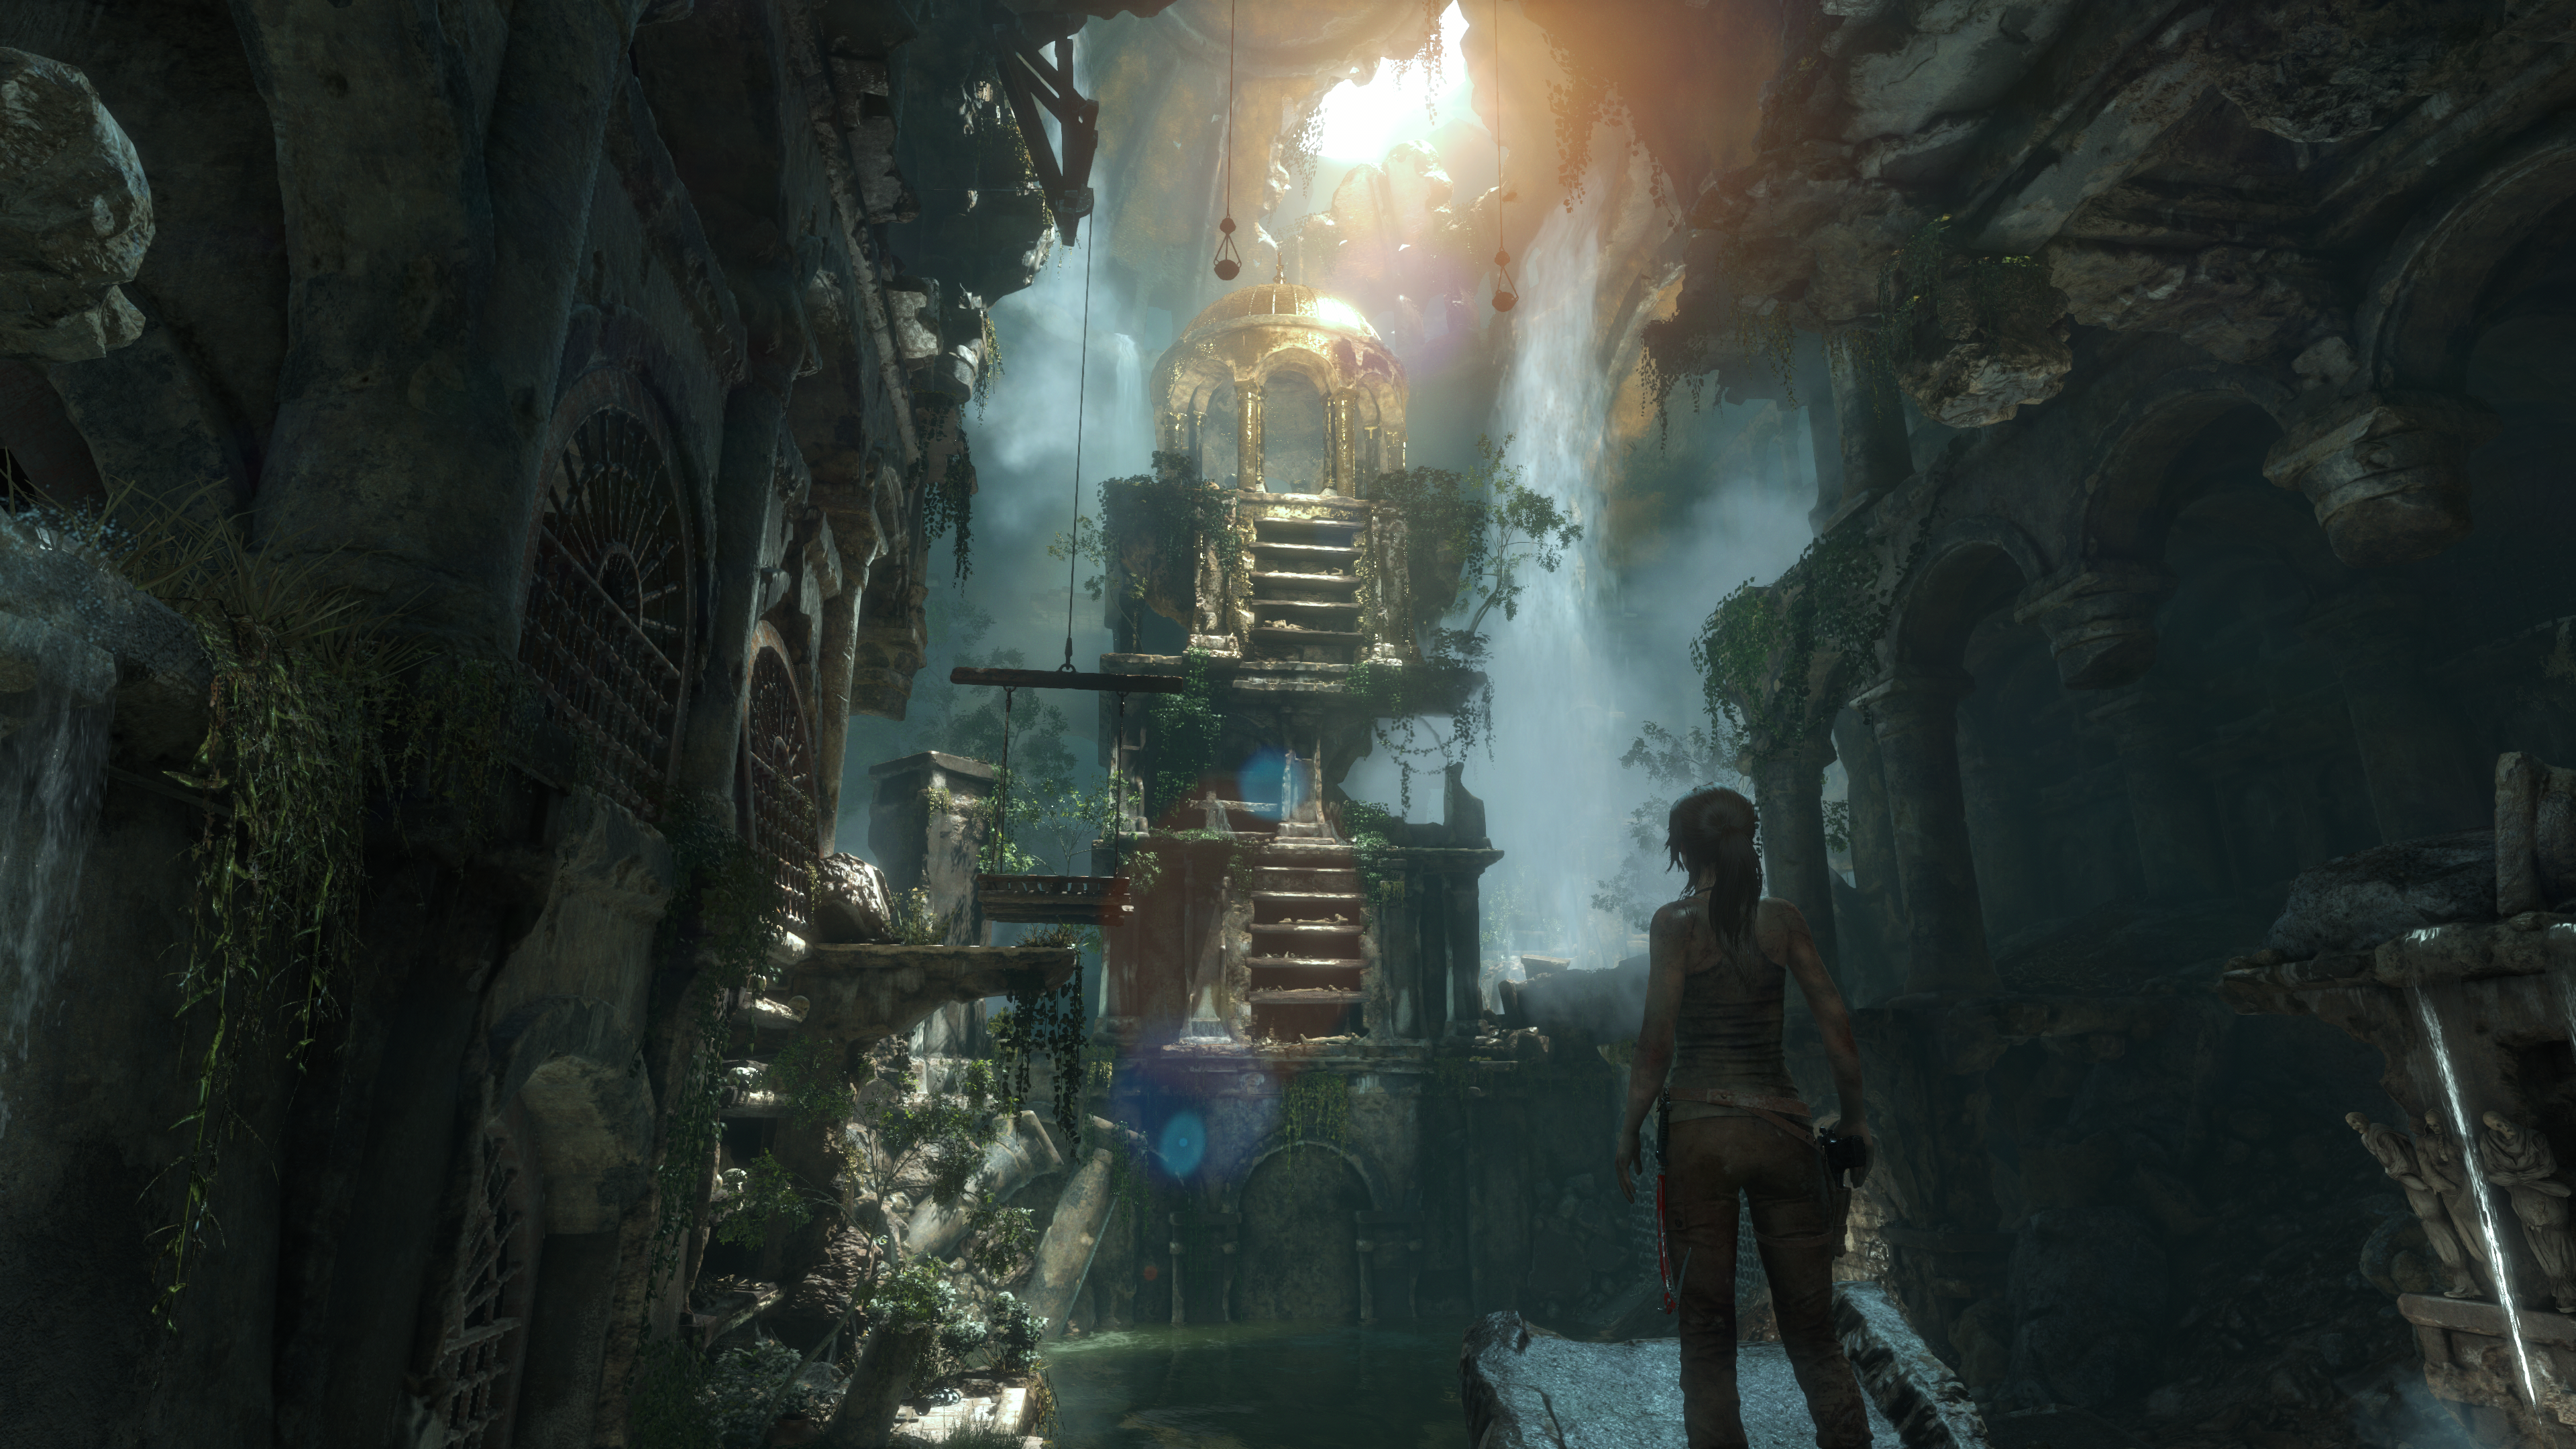 rise of the tomb raider weapons list